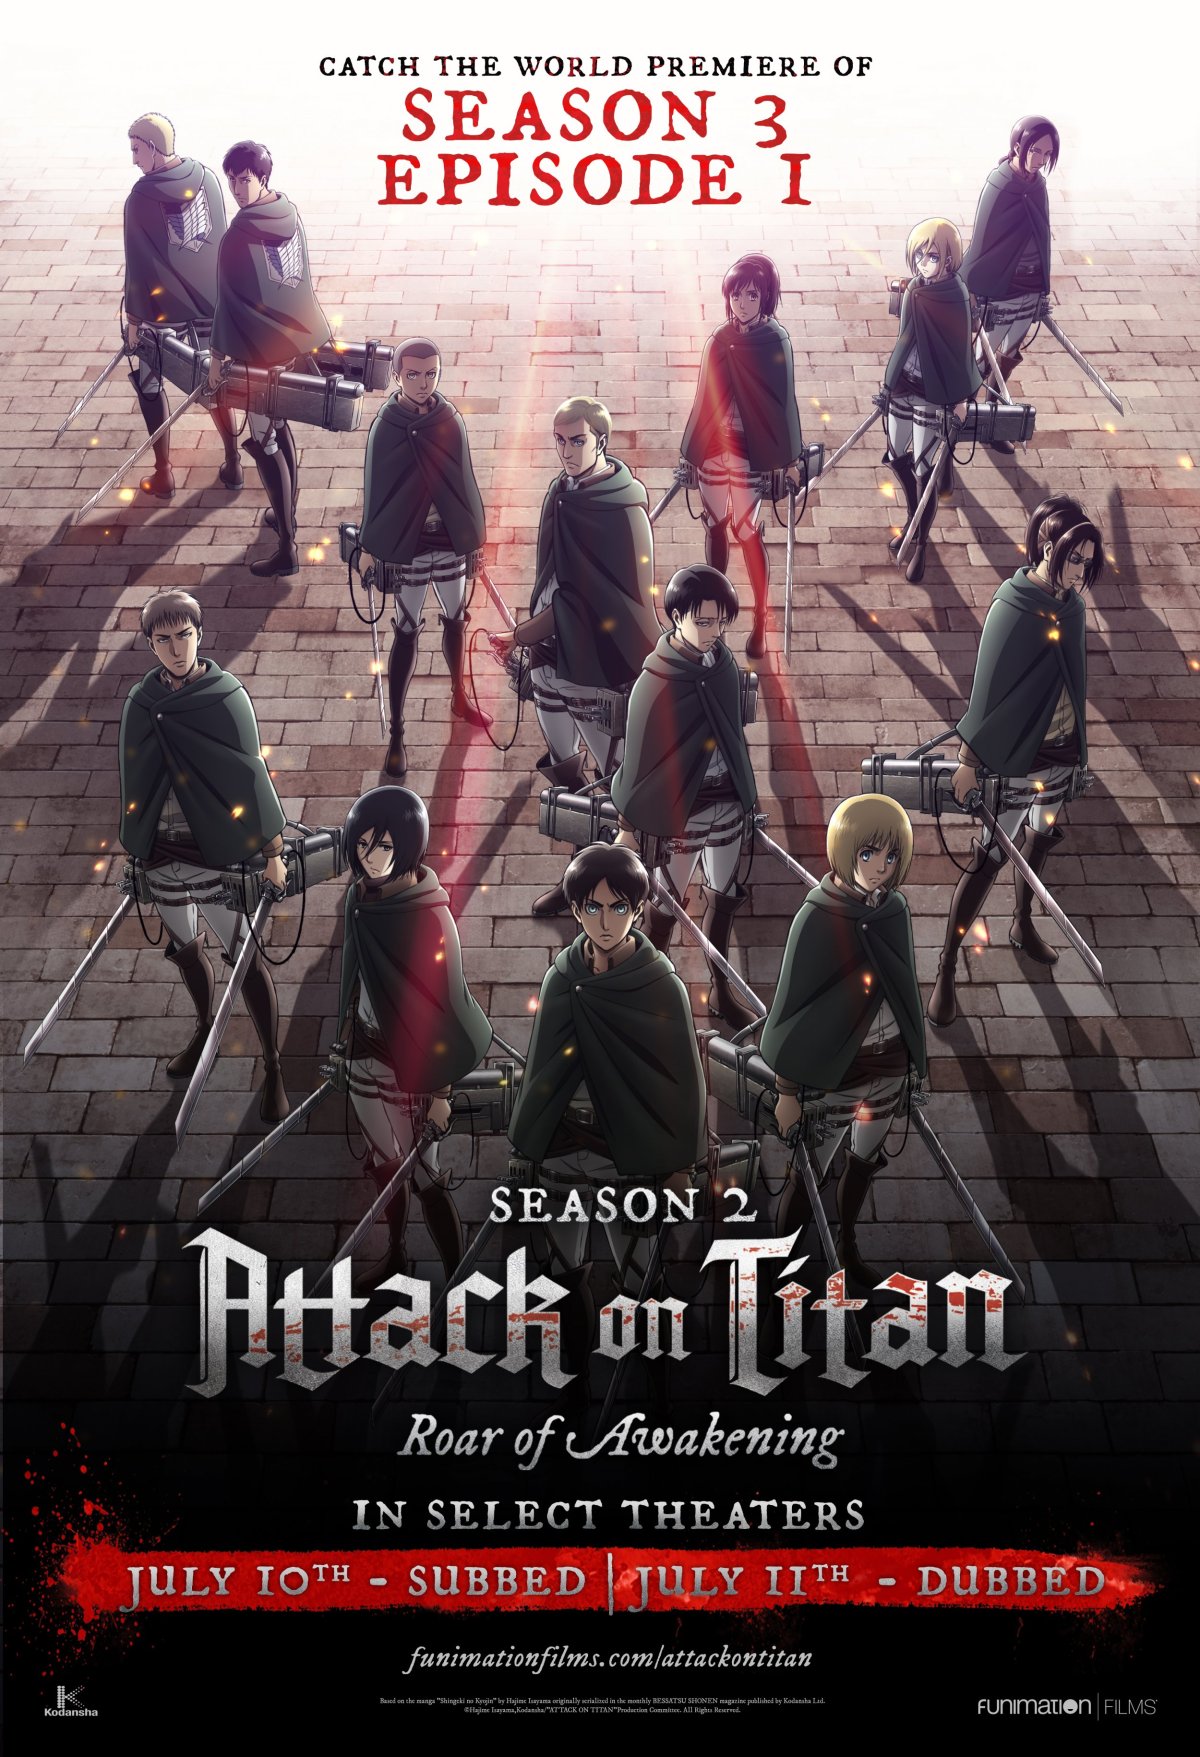 Attack on Titan Season 4 recap: What fans need to know ahead of Part 3